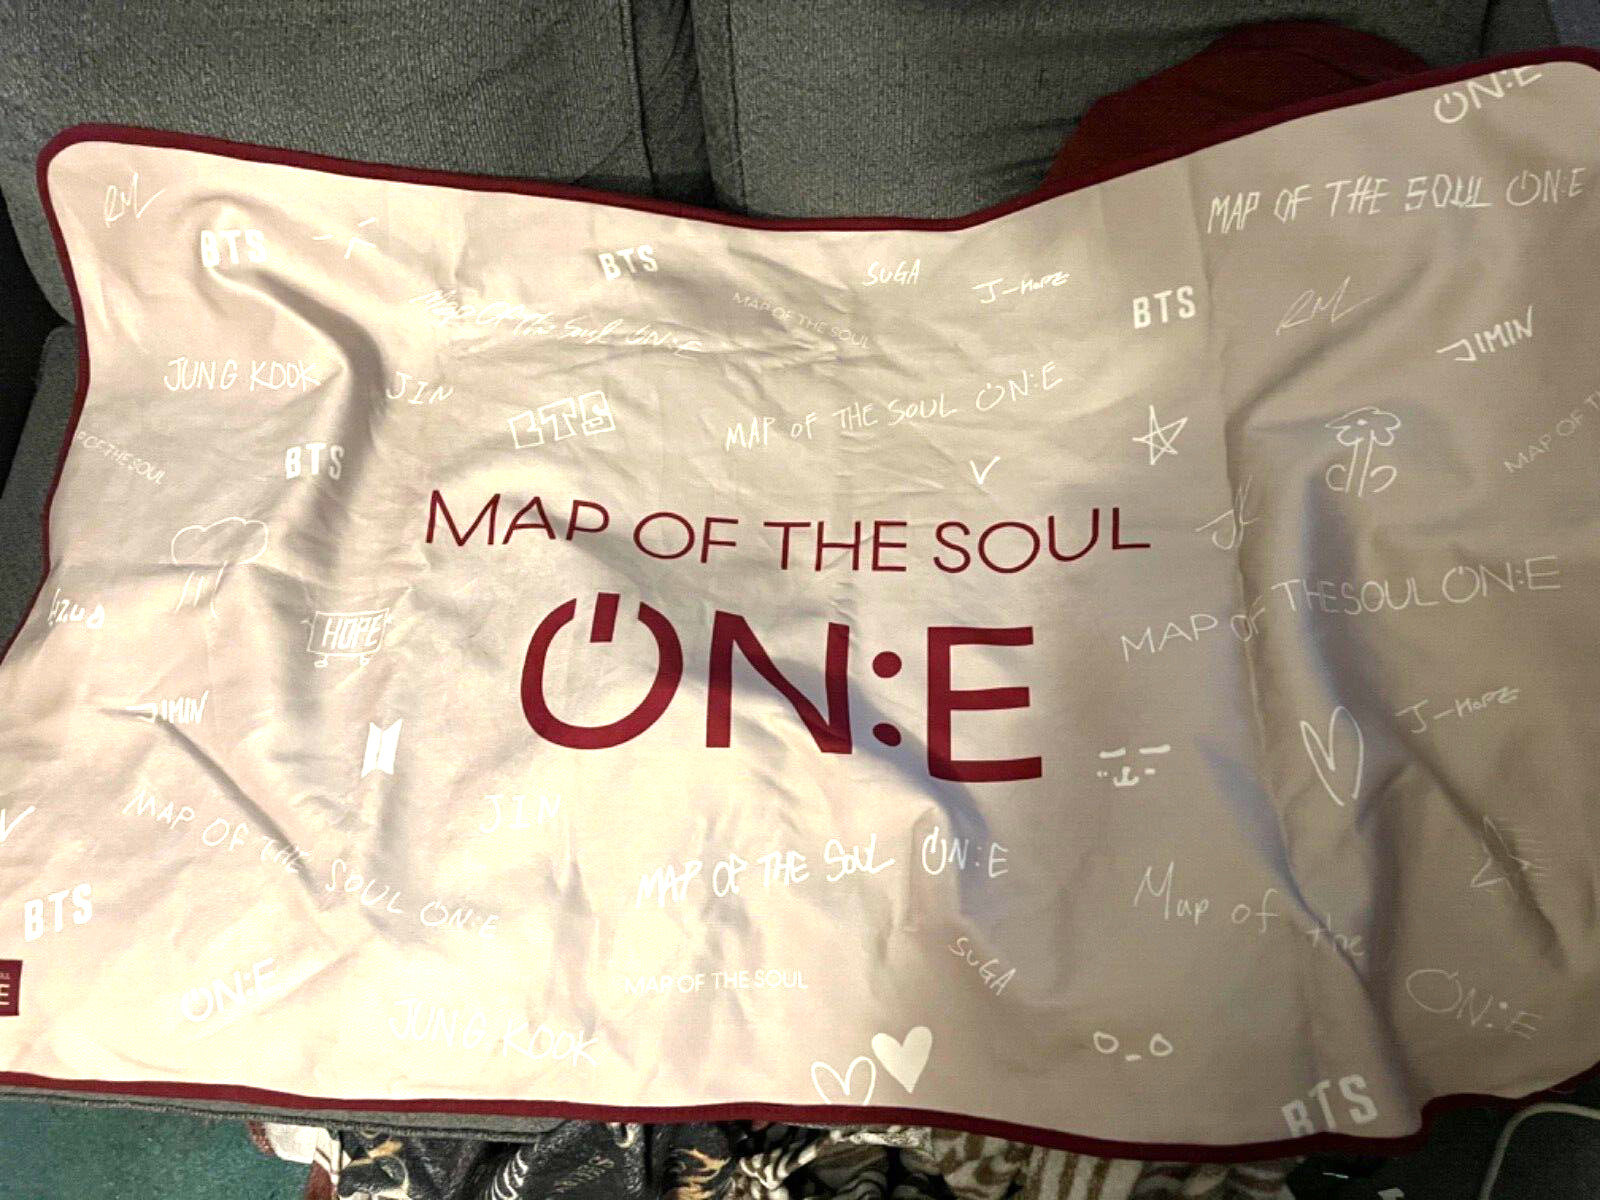 BTS Map Of The Soul : One blanket tour merch